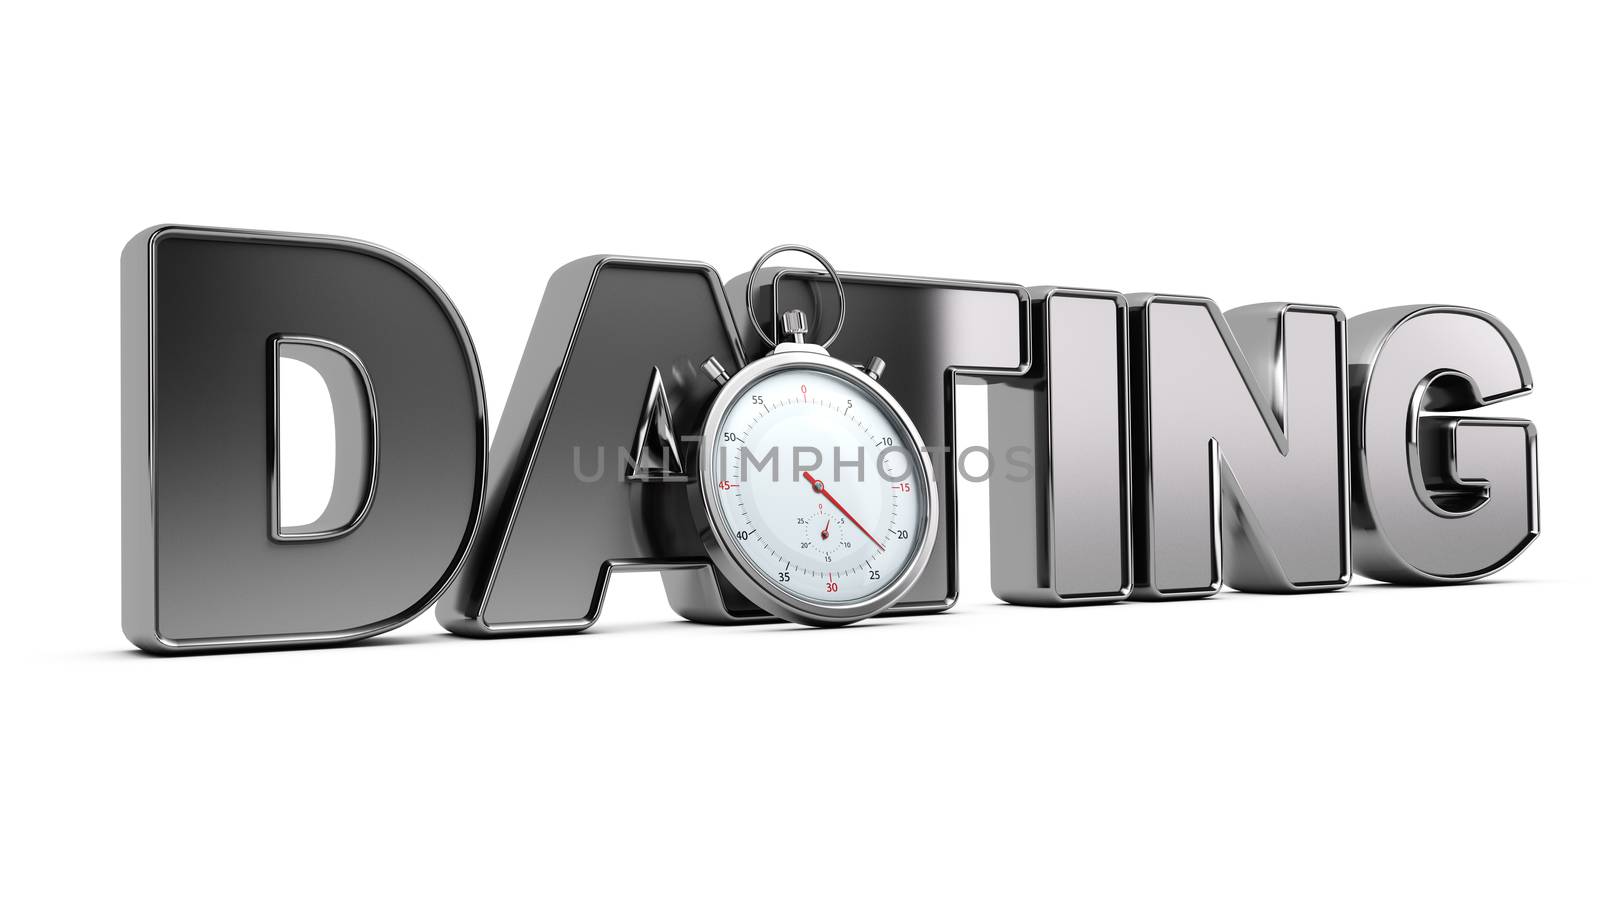 Word dating with stopwatch over white background, 3D illustration of a speed meeting concept.